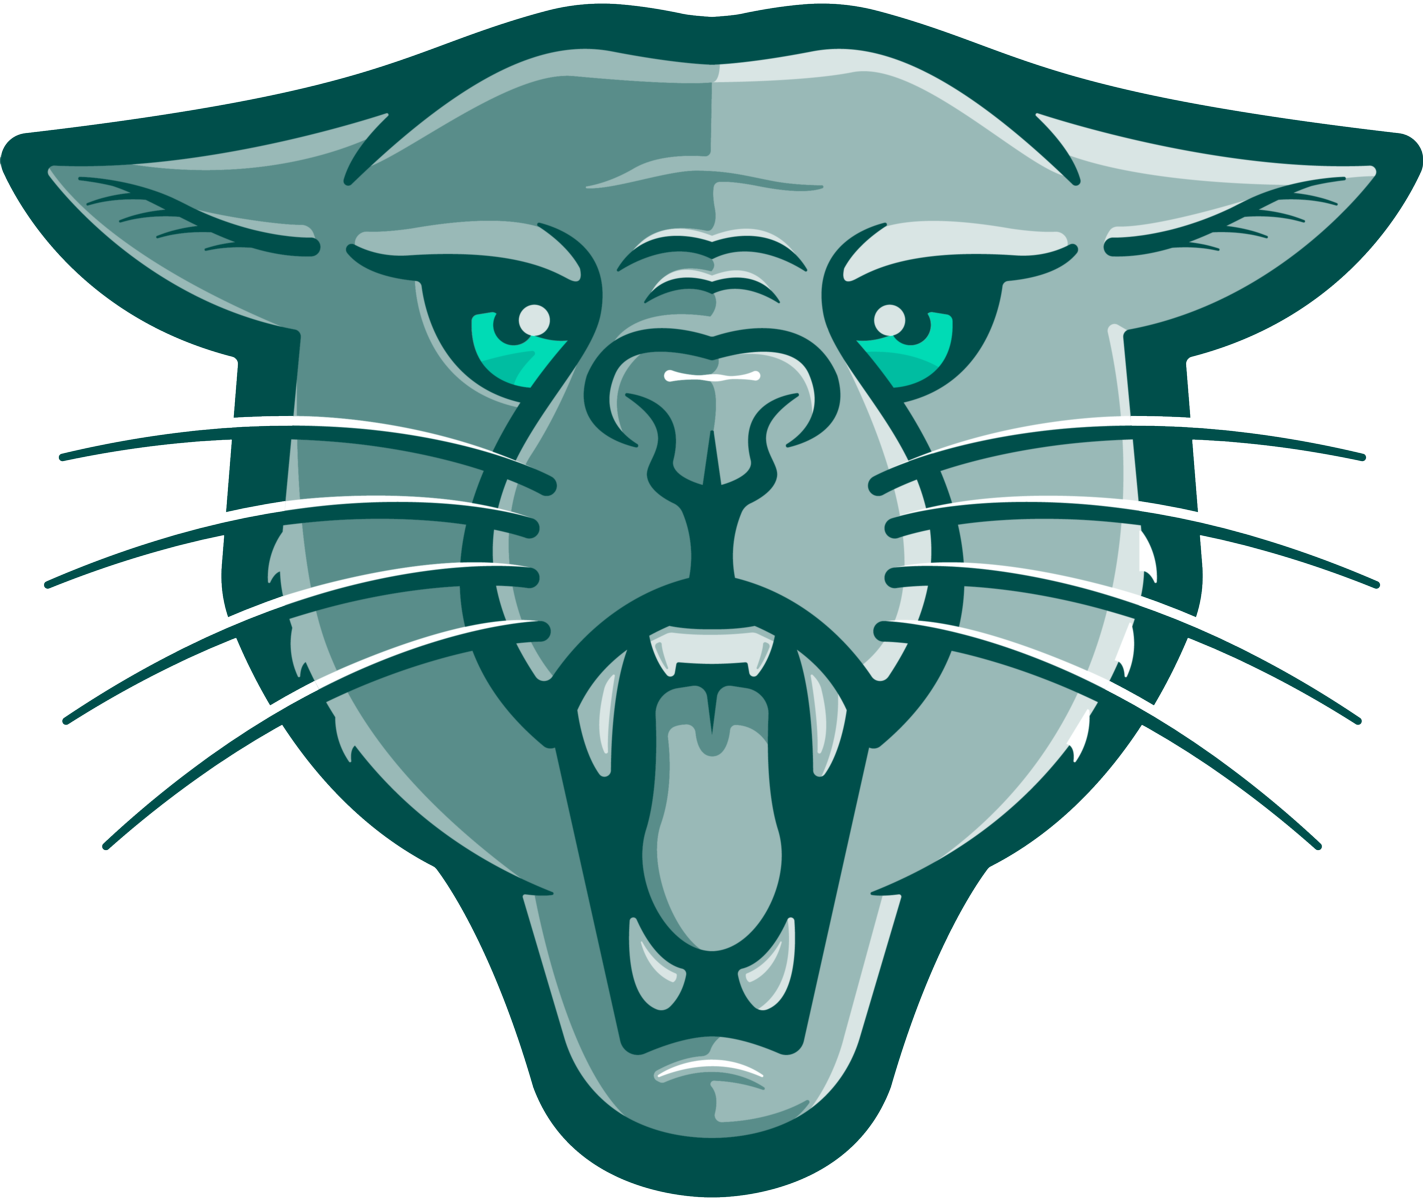 A Heritage Green outline of a roaring cougar head viewed head-on with flattened ears. The left side of the face is shaded a medium opacity Heritage Green with the right side of the face shaded a light opacity Heritage Green. The eyes are Mint Green and it is all on a white background.